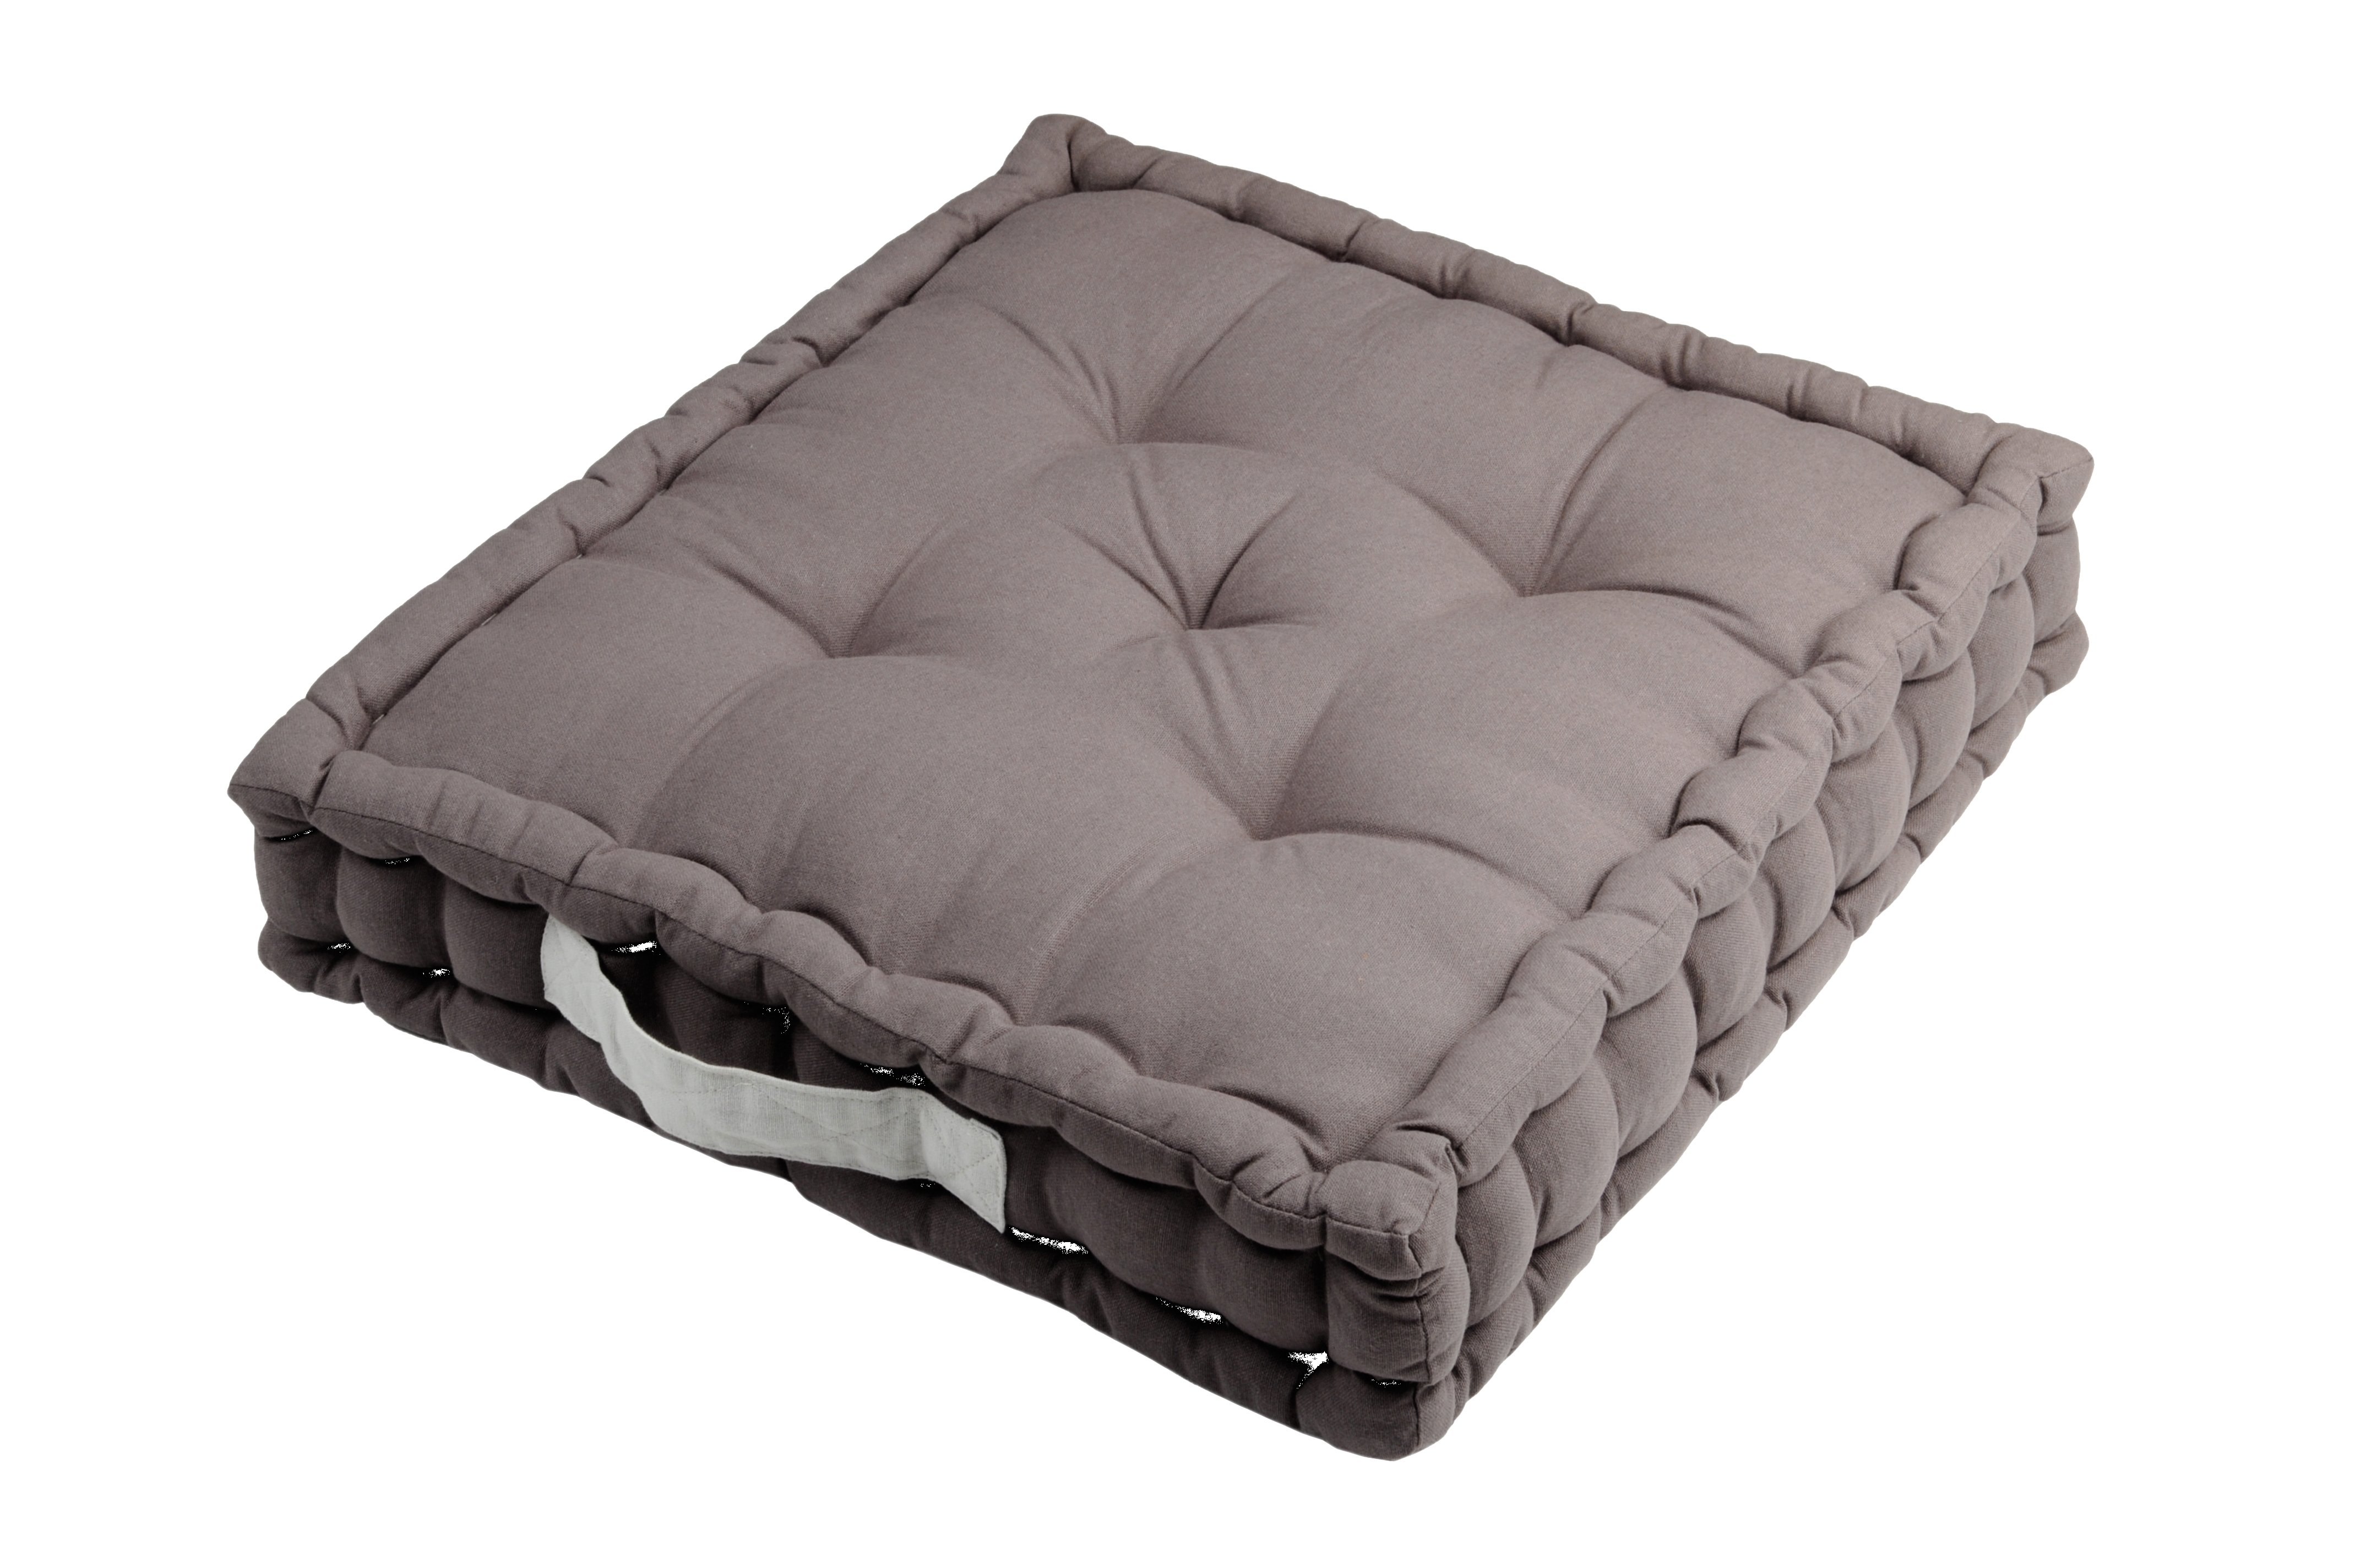 DUO COUSSIN 45X45X10 GRIS PERLE